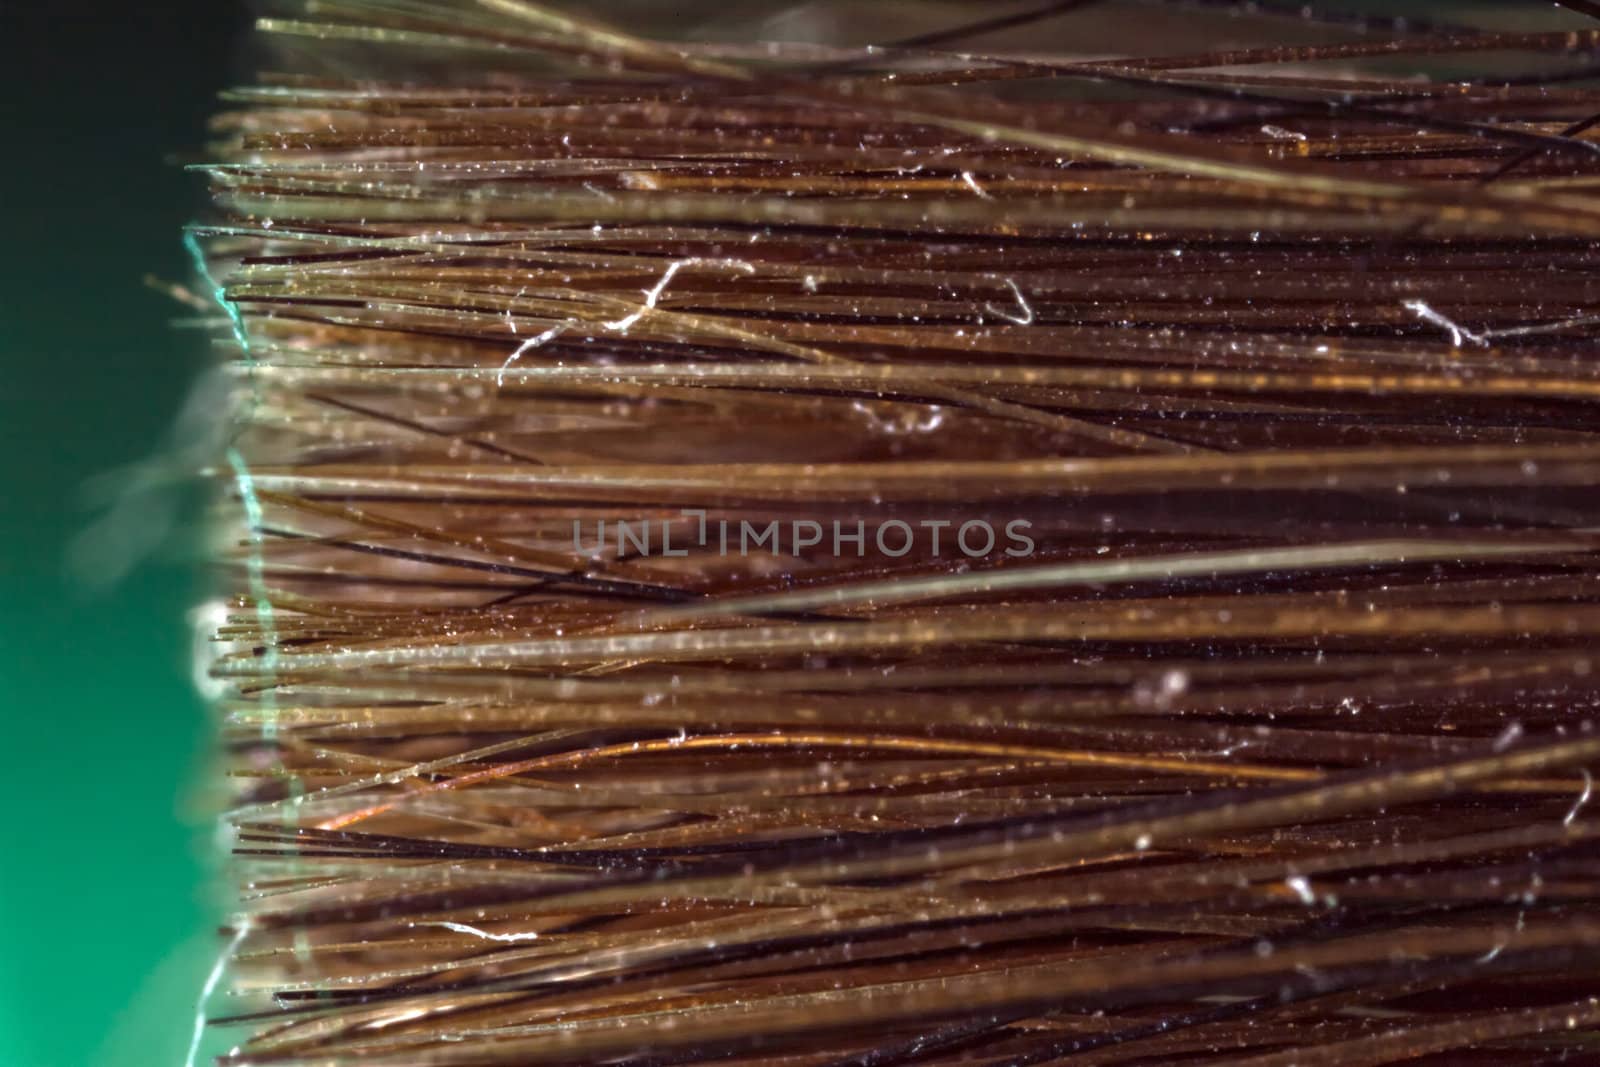 Macro detail shot of the bristles on an artist's paintbrush at 5 times real life size